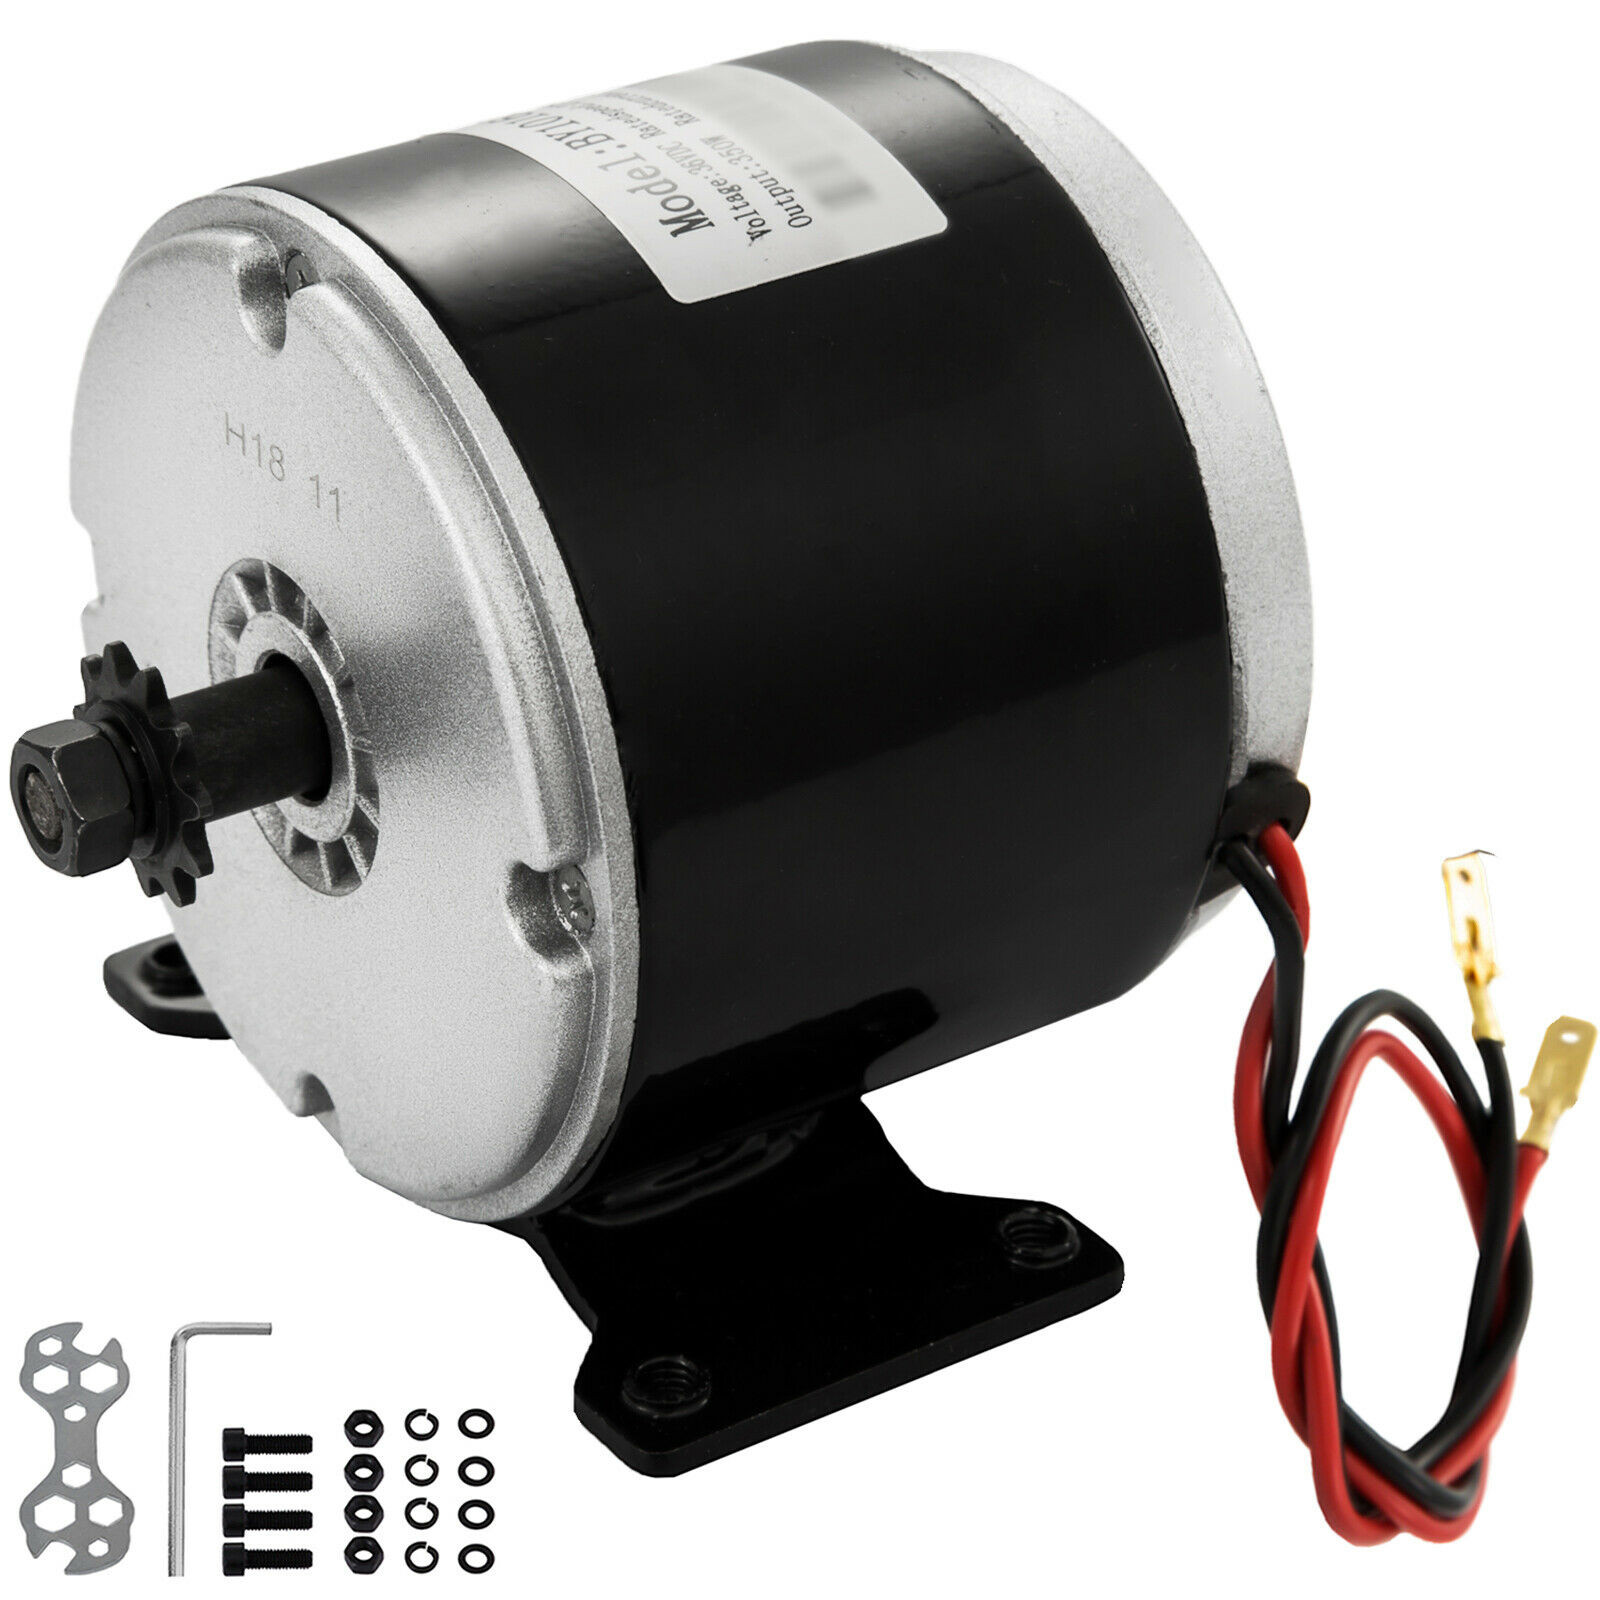 36V DC Electric Motor E-Scooter 1000W TY1020 3000RPM mini bike Permanent Brushed